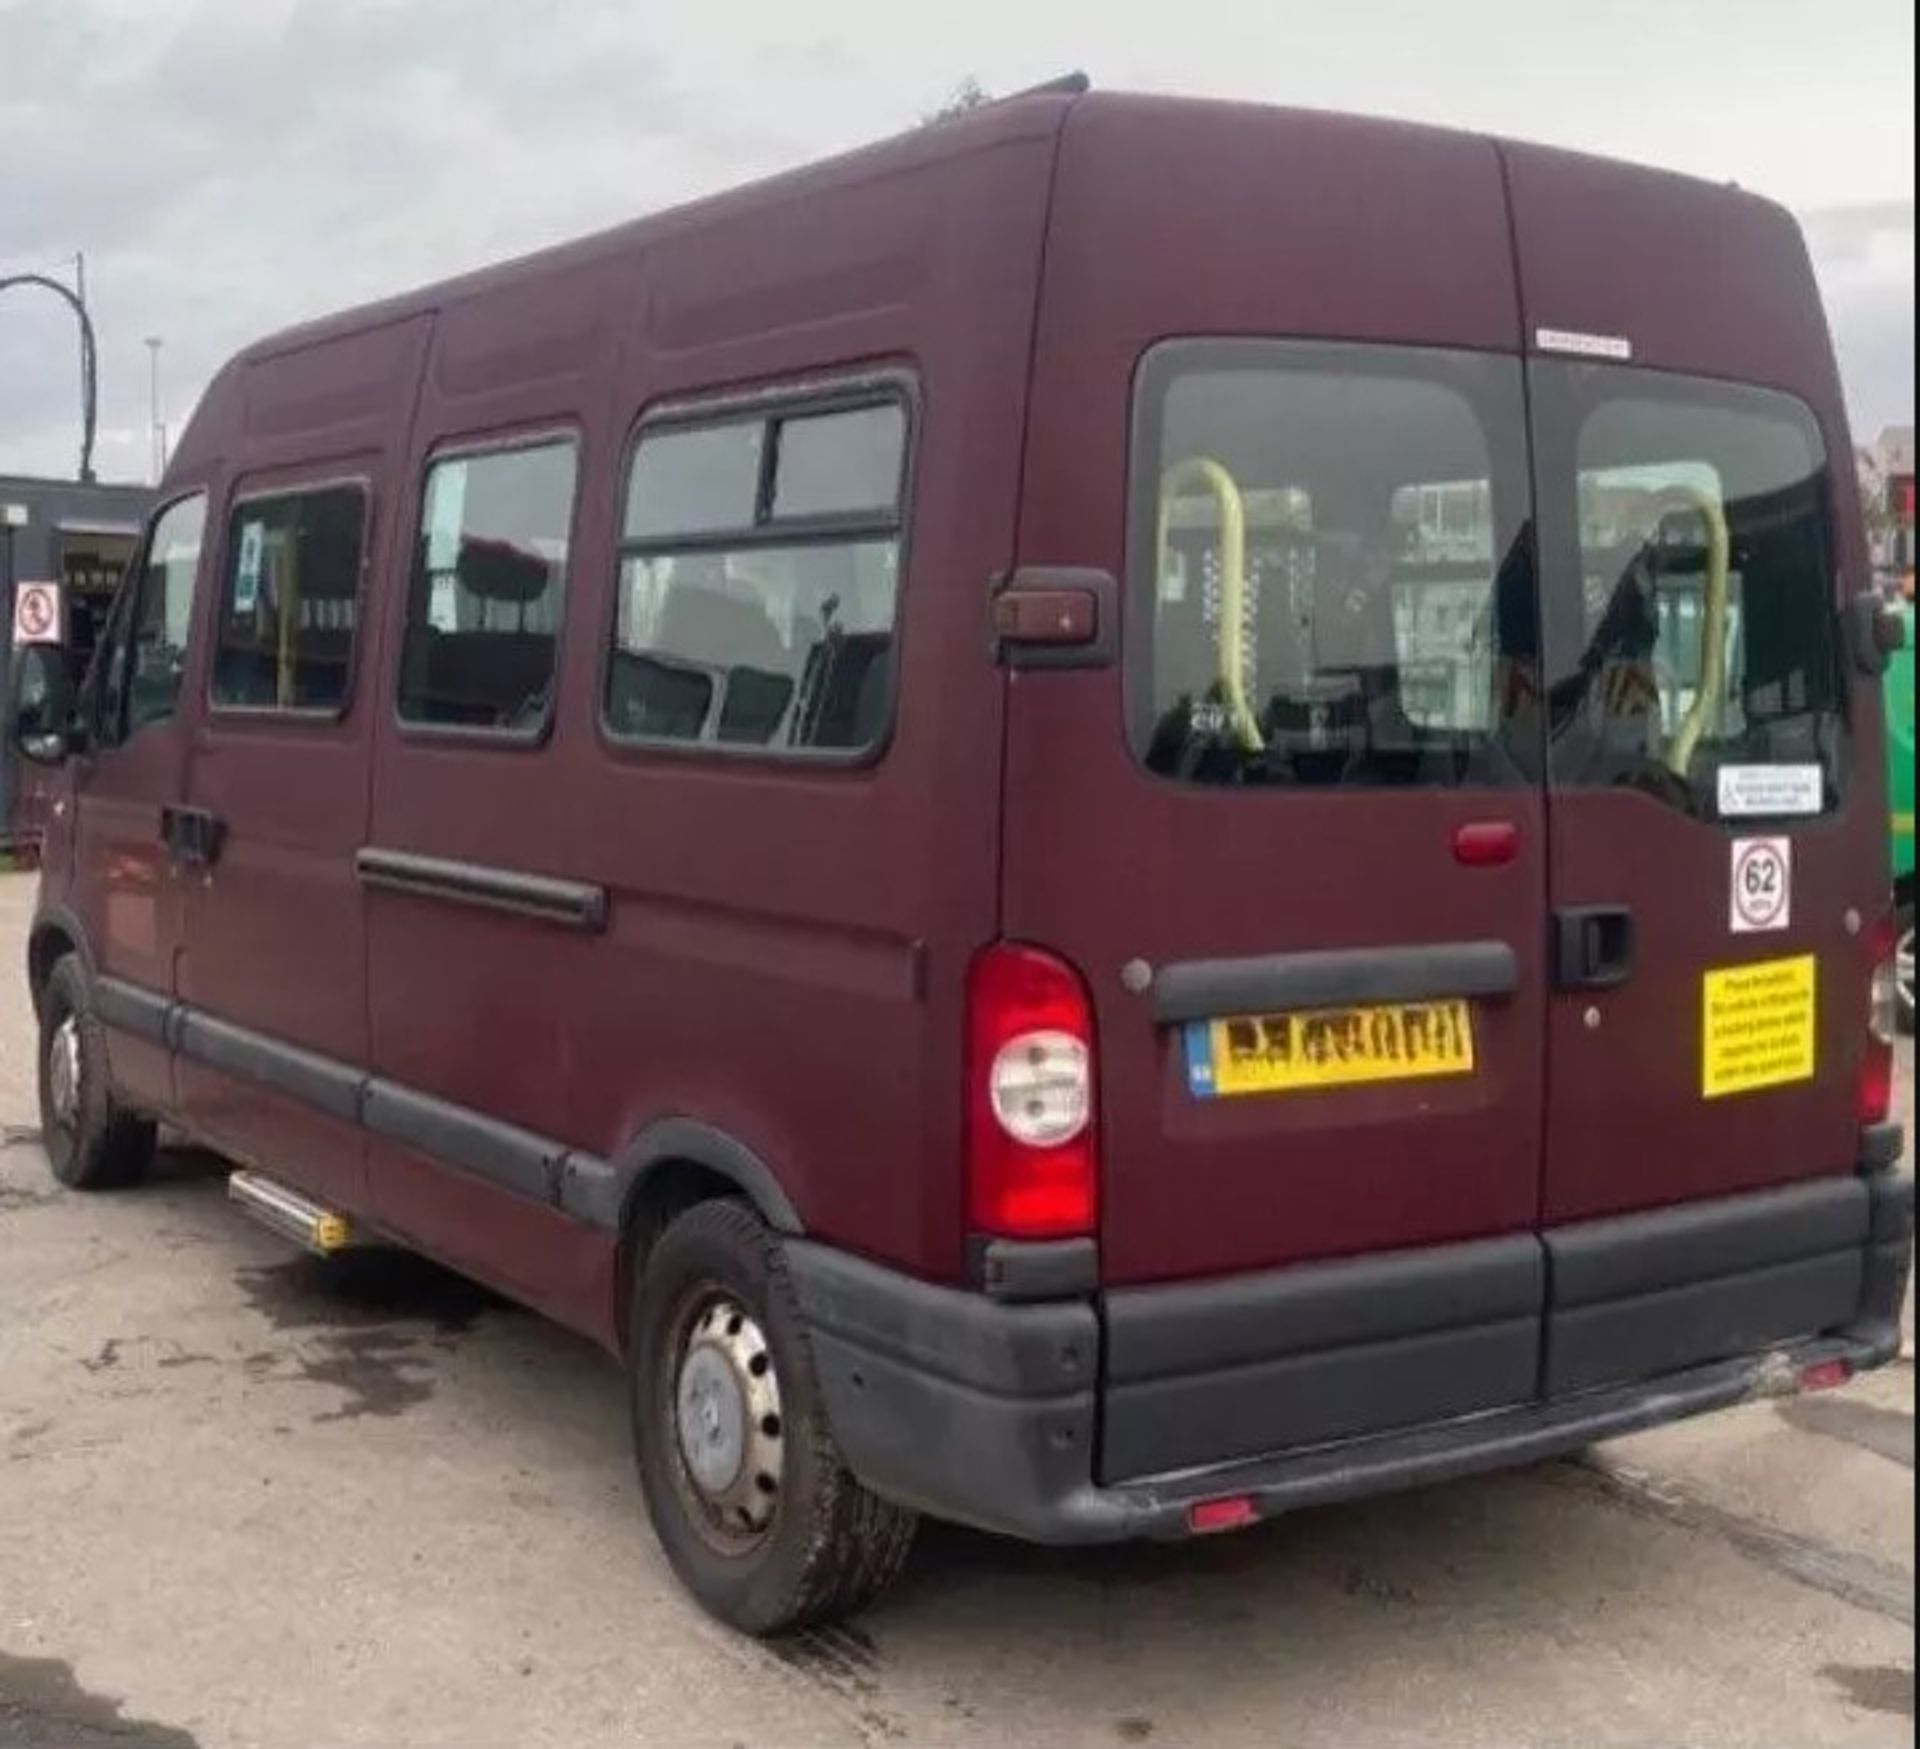 RELIABLE 2007 RENAULT MASTER LWB MINIBUS - IDEAL FOR RESTORATION OR CONVERSION (SPARES OR REPAIRS ) - Image 3 of 14